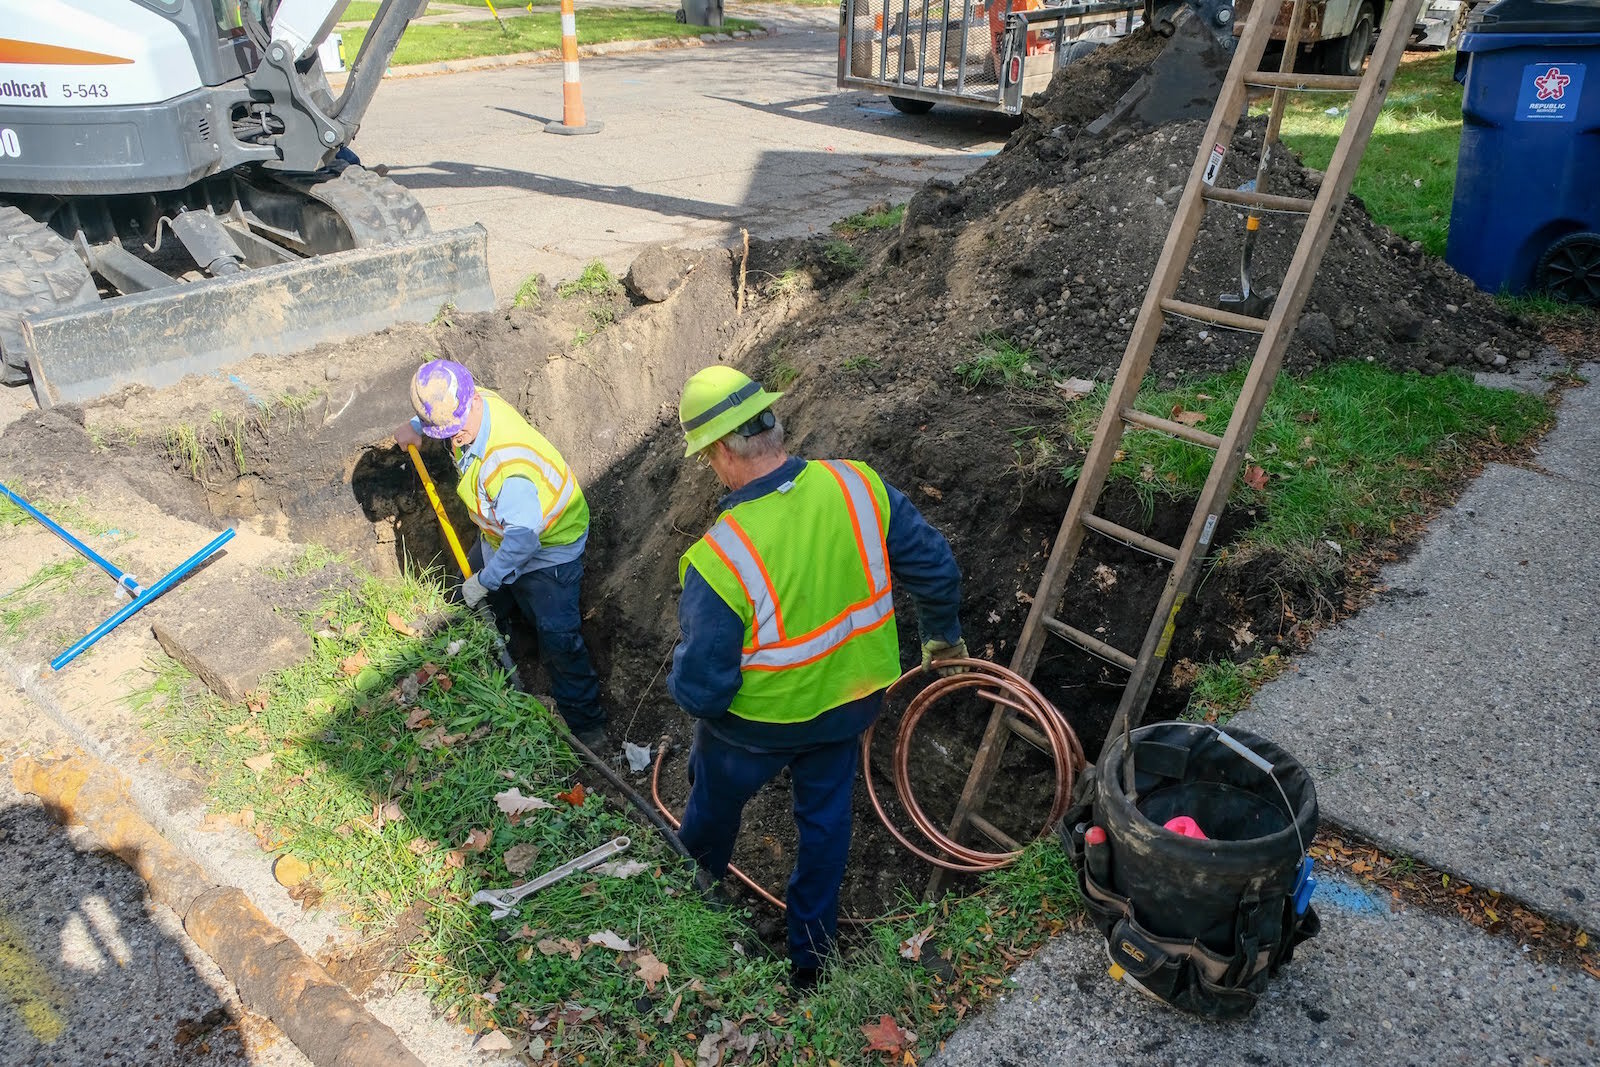 Work to replace lead water service lines has taken place in various parts of the city.